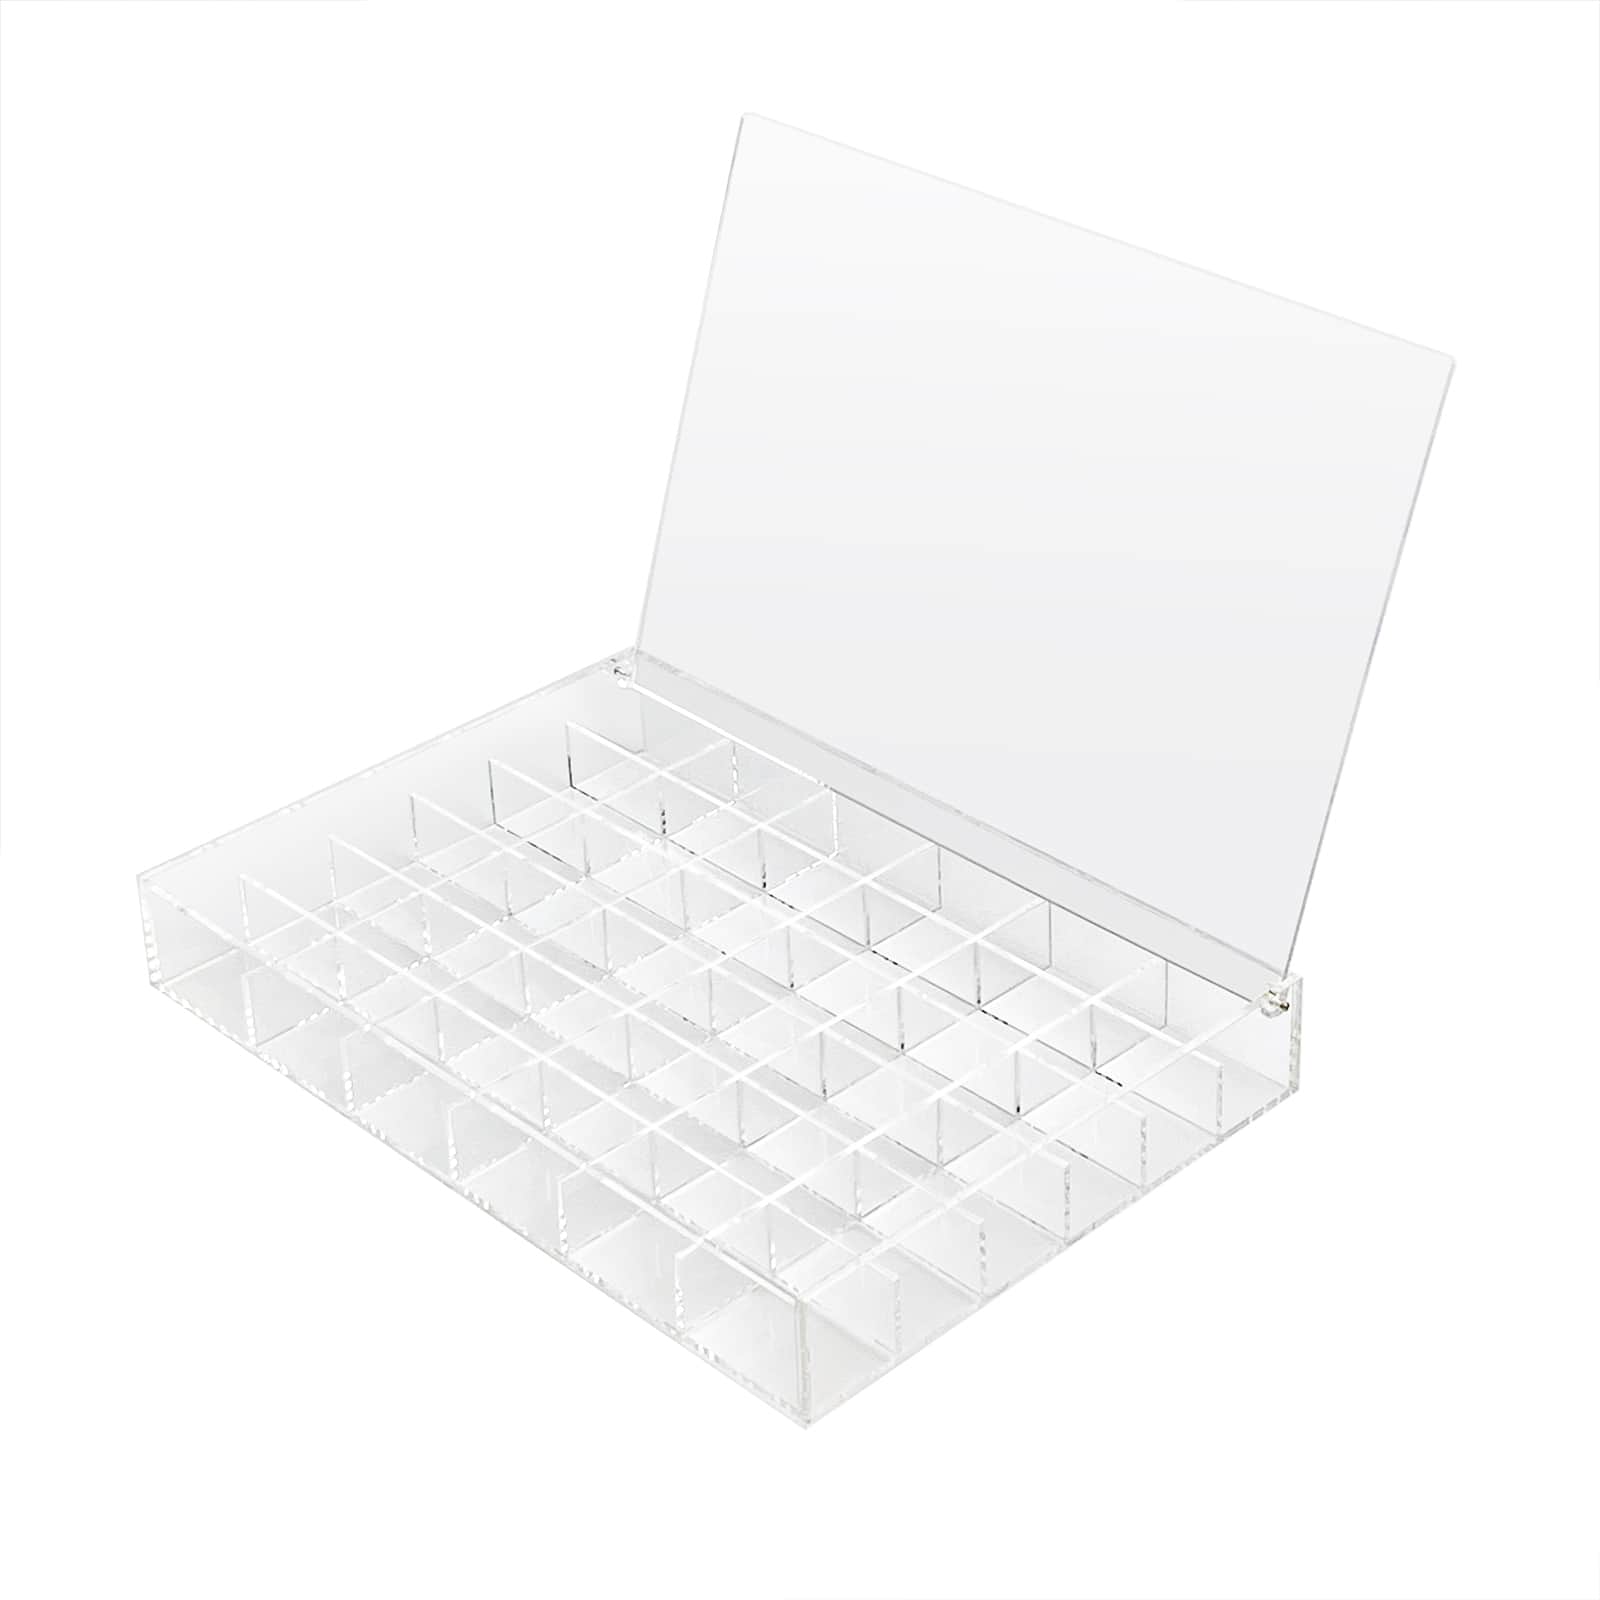 Bead Storage Box with 6 Container Stacks by Bead Landing™